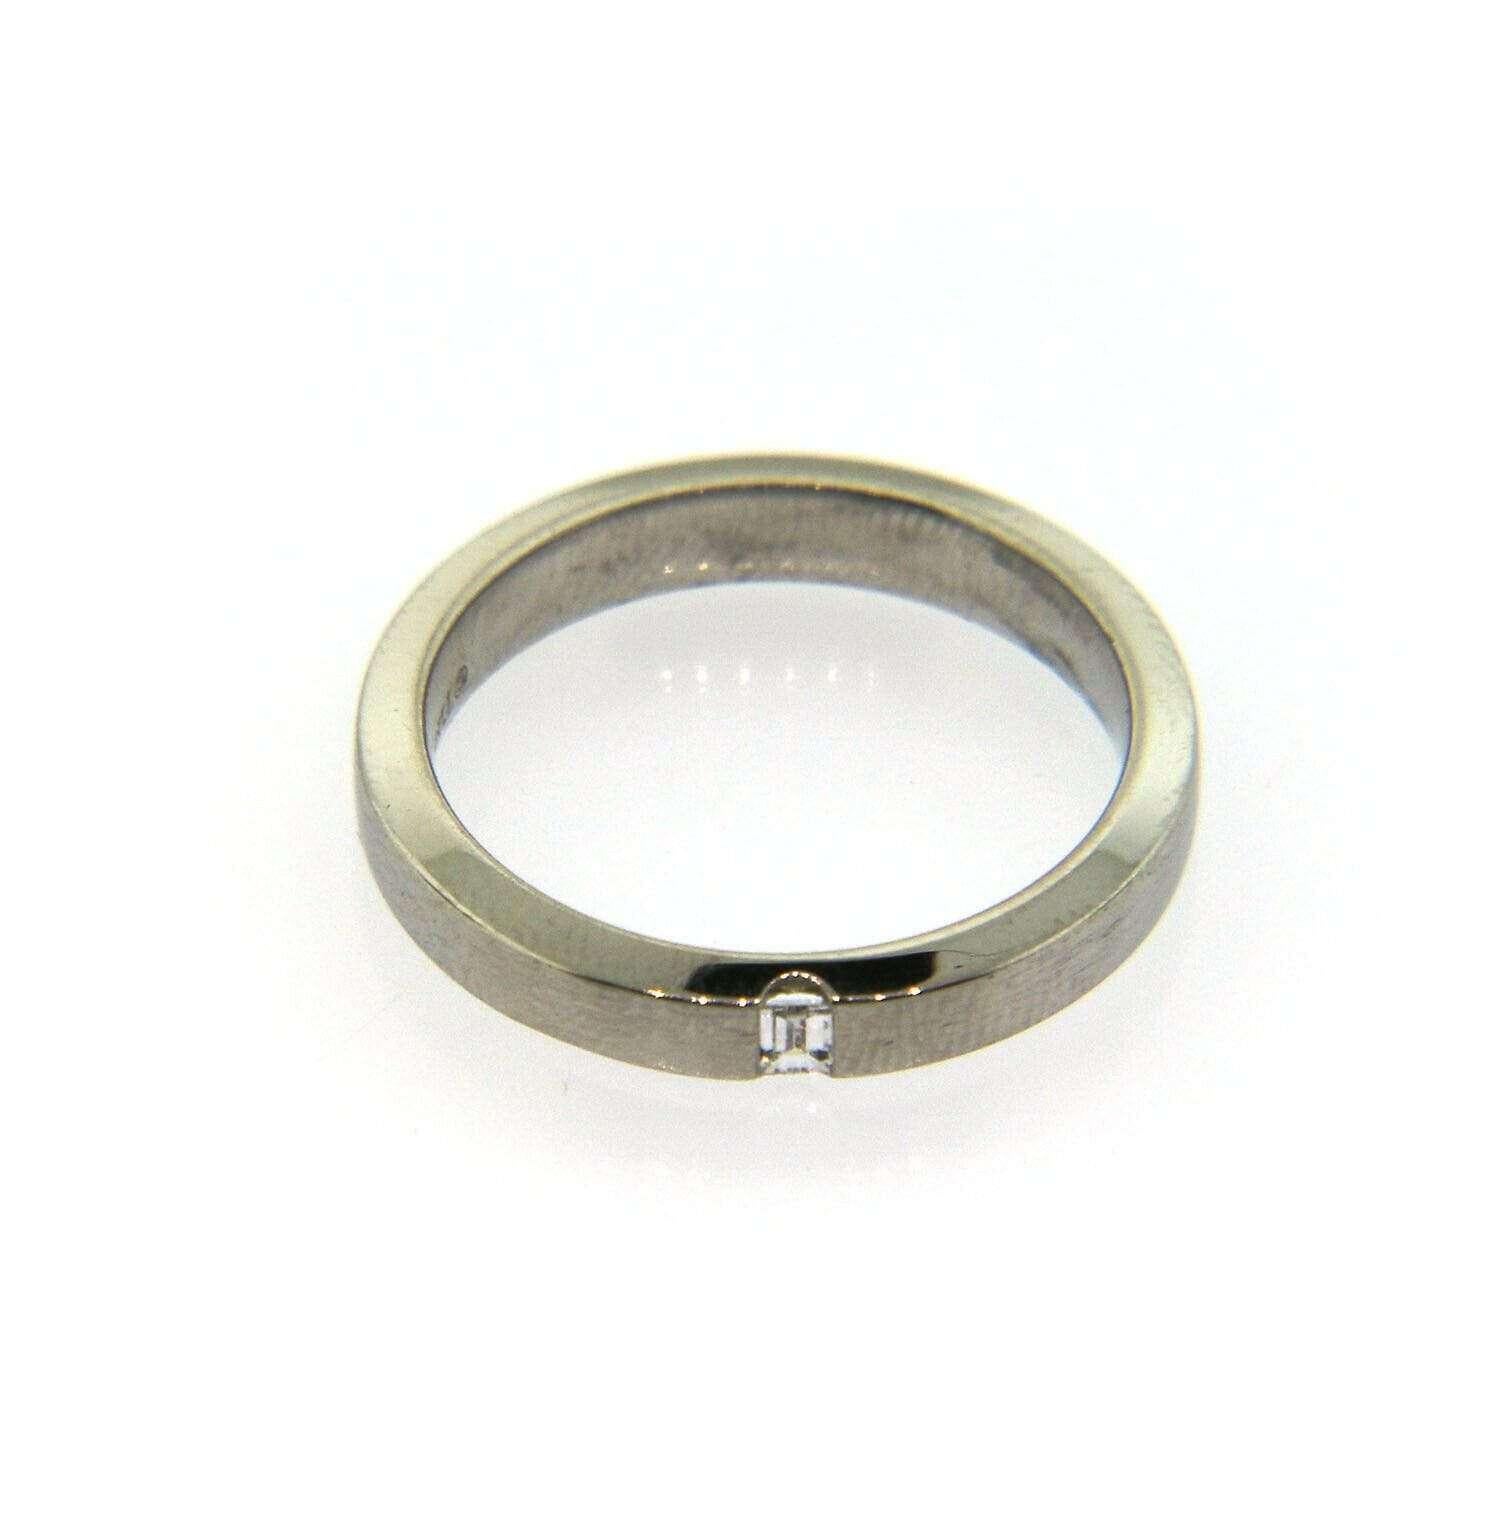 Tiffany & Co. Diamond Band Ring in Platinum In Excellent Condition For Sale In Vienna, VA